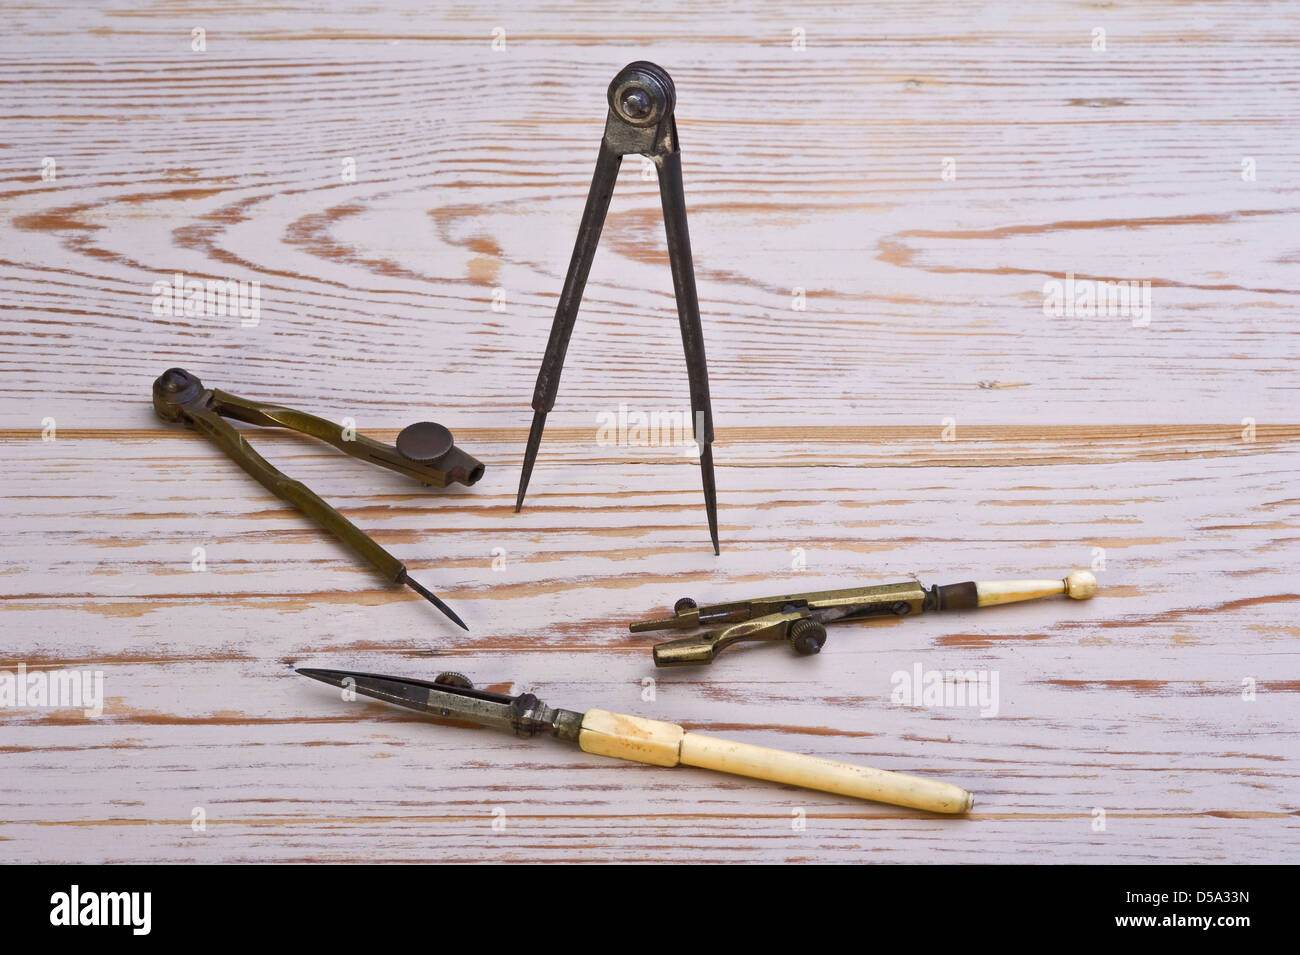 Antique technical drawing instruments, on an old distressed table. Stock Photo